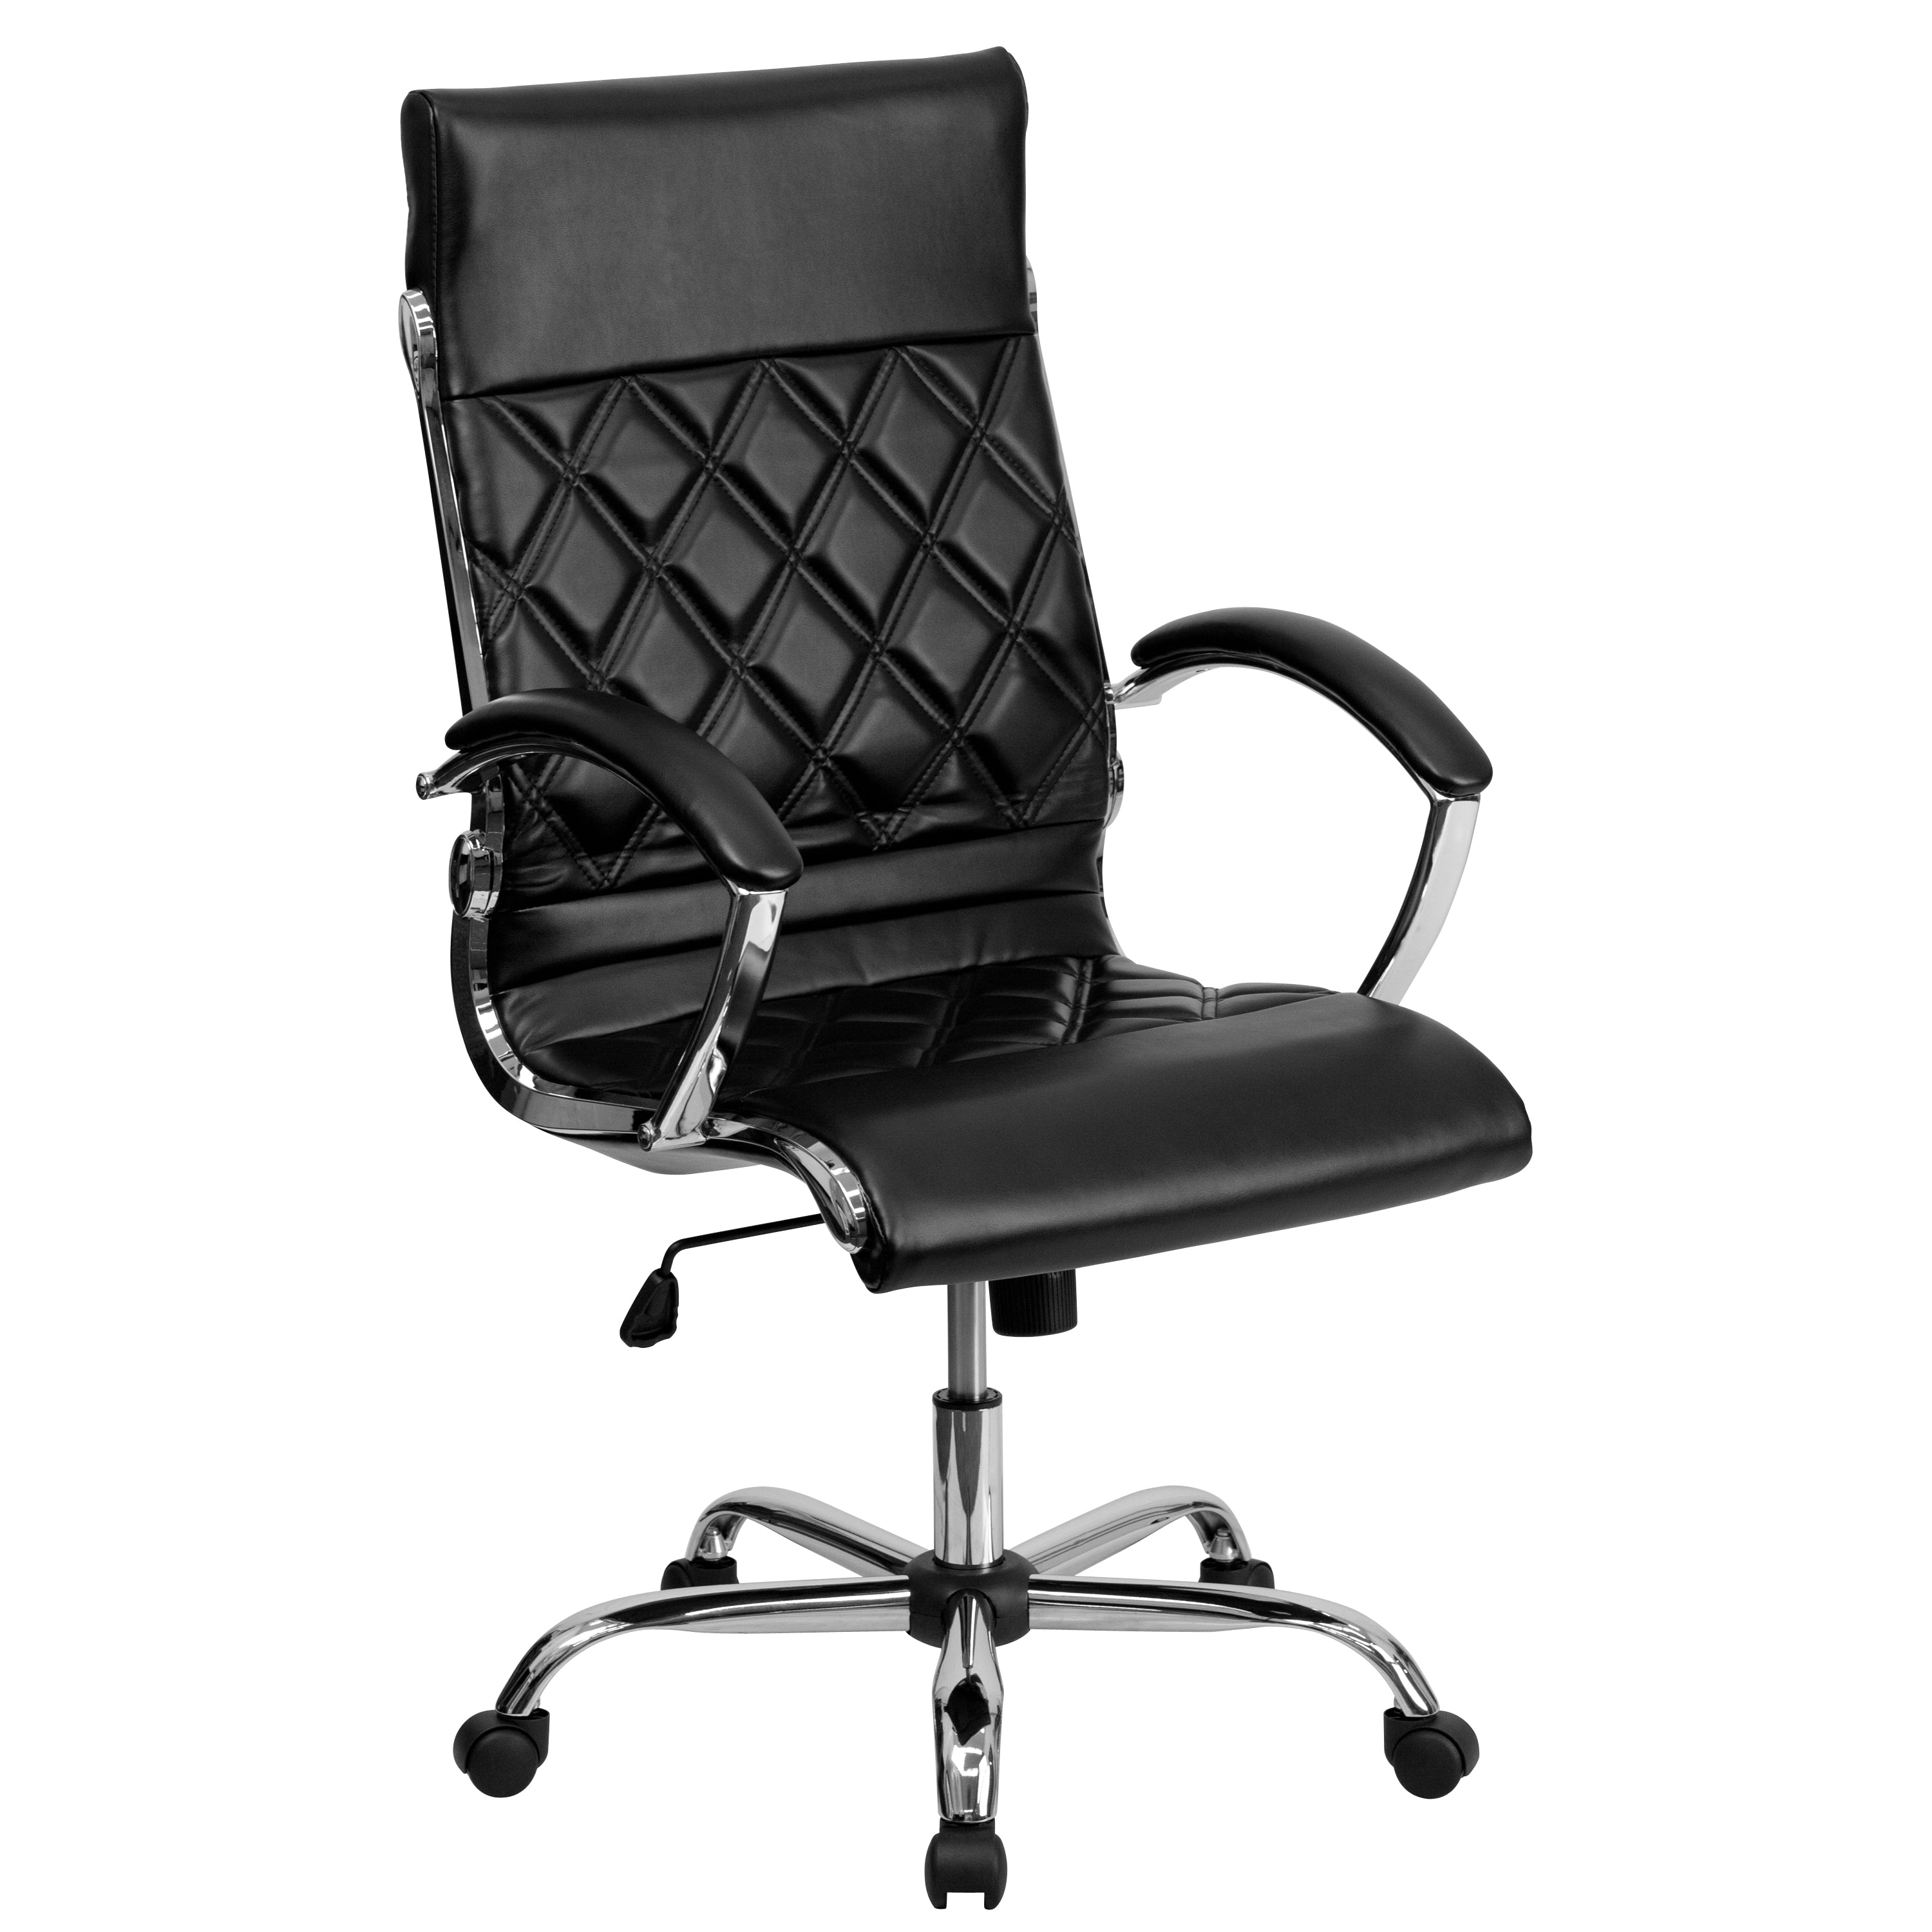 High Back Designer Quilted LeatherSoft Executive Swivel Office Chair with Chrome Base and Arms-Office Chair-Flash Furniture-Wall2Wall Furnishings